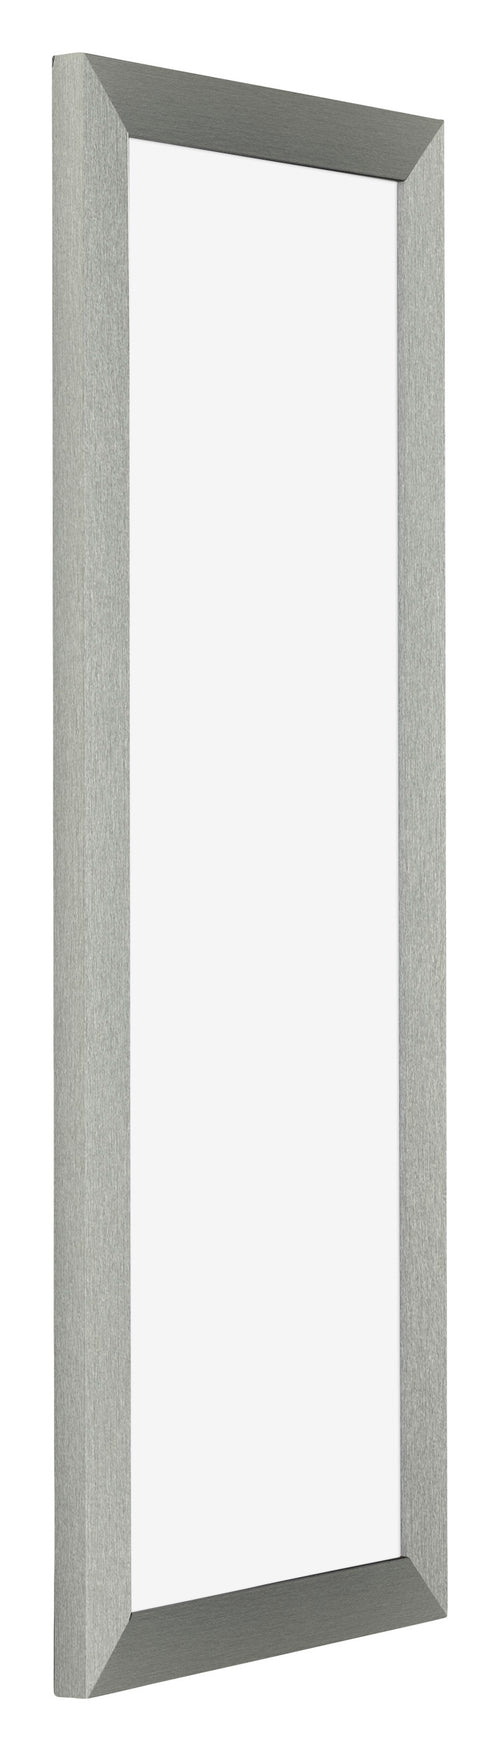 Mura MDF Photo Frame 33x98cm Champagne Front Oblique | Yourdecoration.co.uk